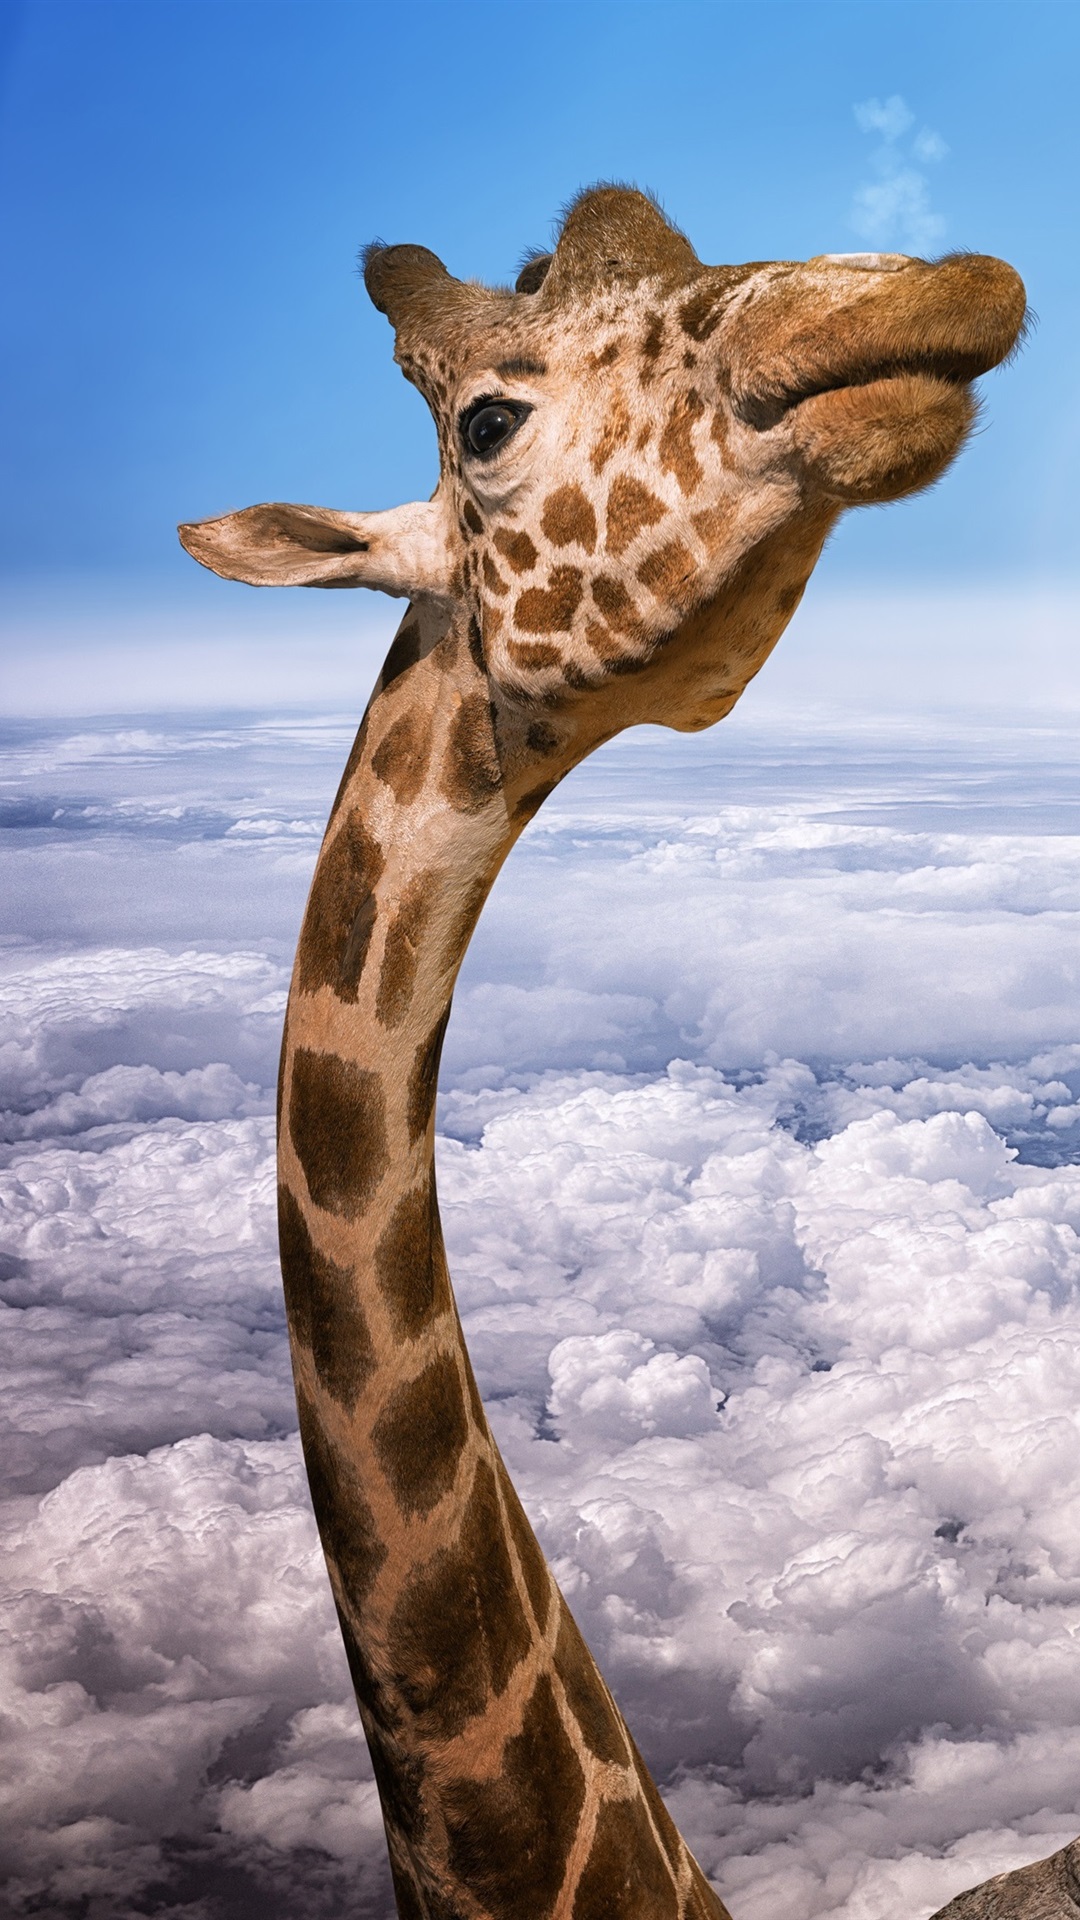 Giraffe Head, Eagles, Height, Clouds, Sky, Creative Picture 1080x1920 IPhone 8 7 6 6S Plus Wallpaper, Background, Picture, Image